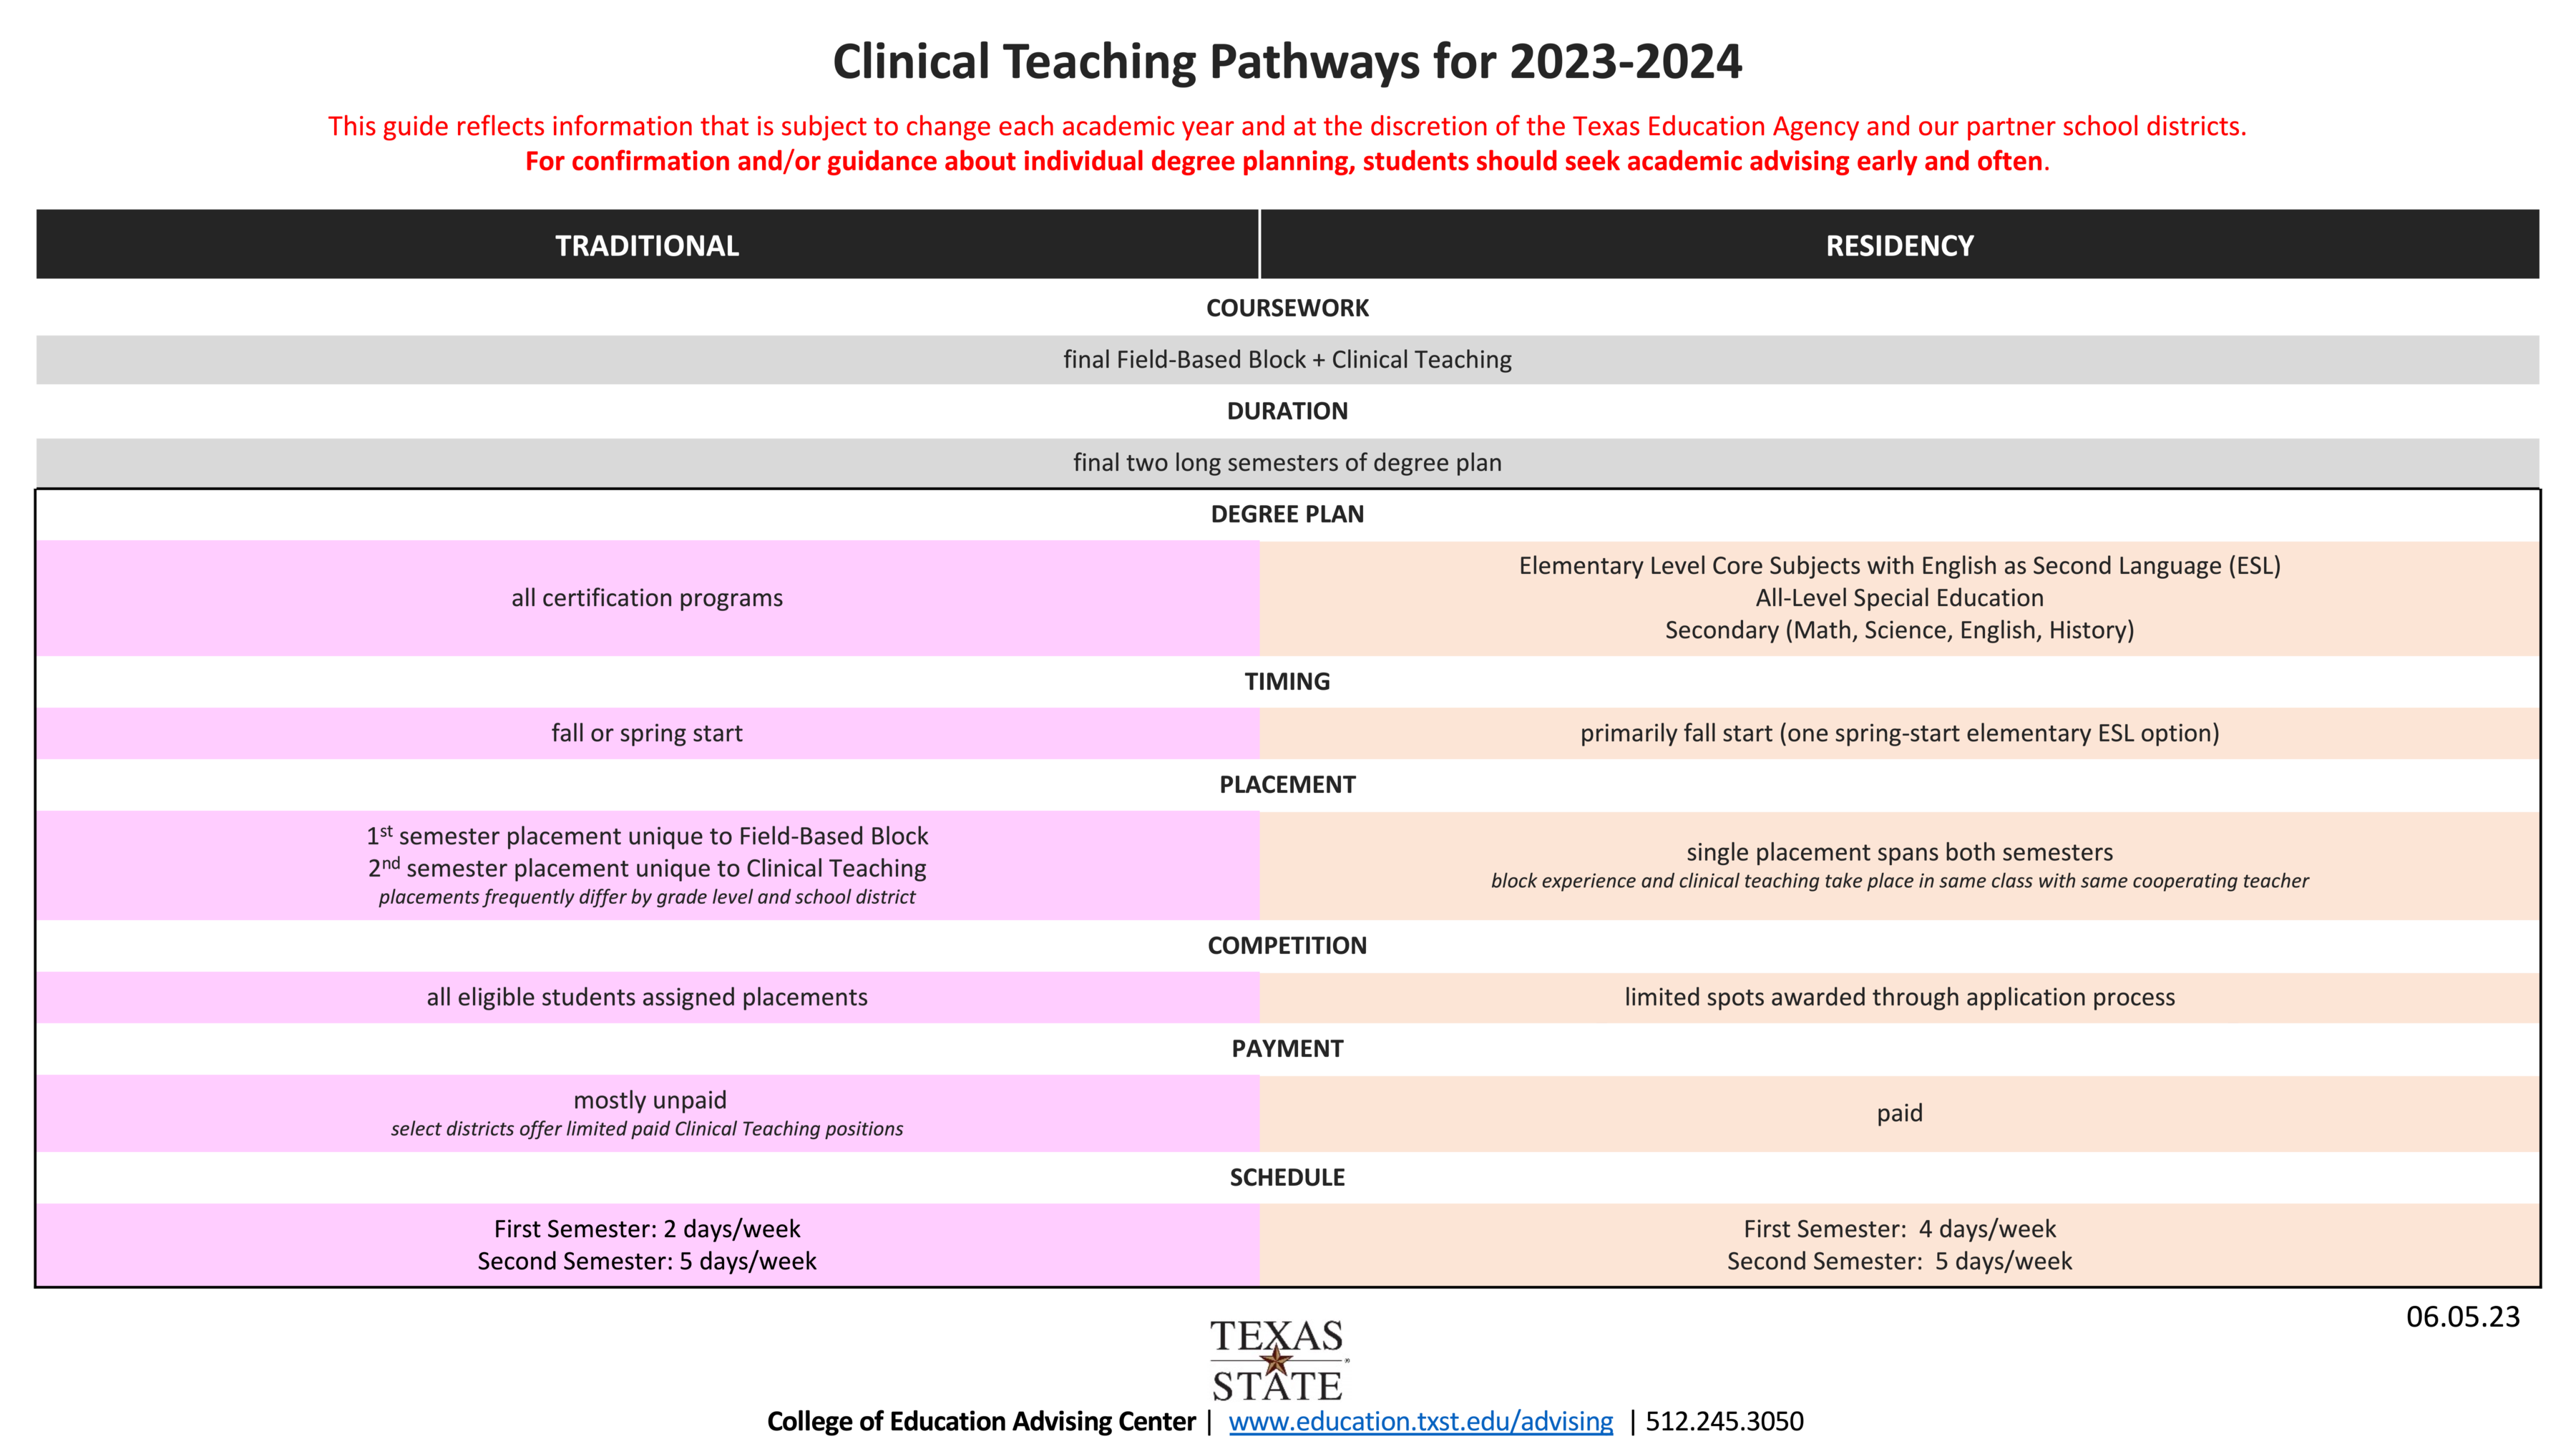 Field Block and Clinical Teaching Options